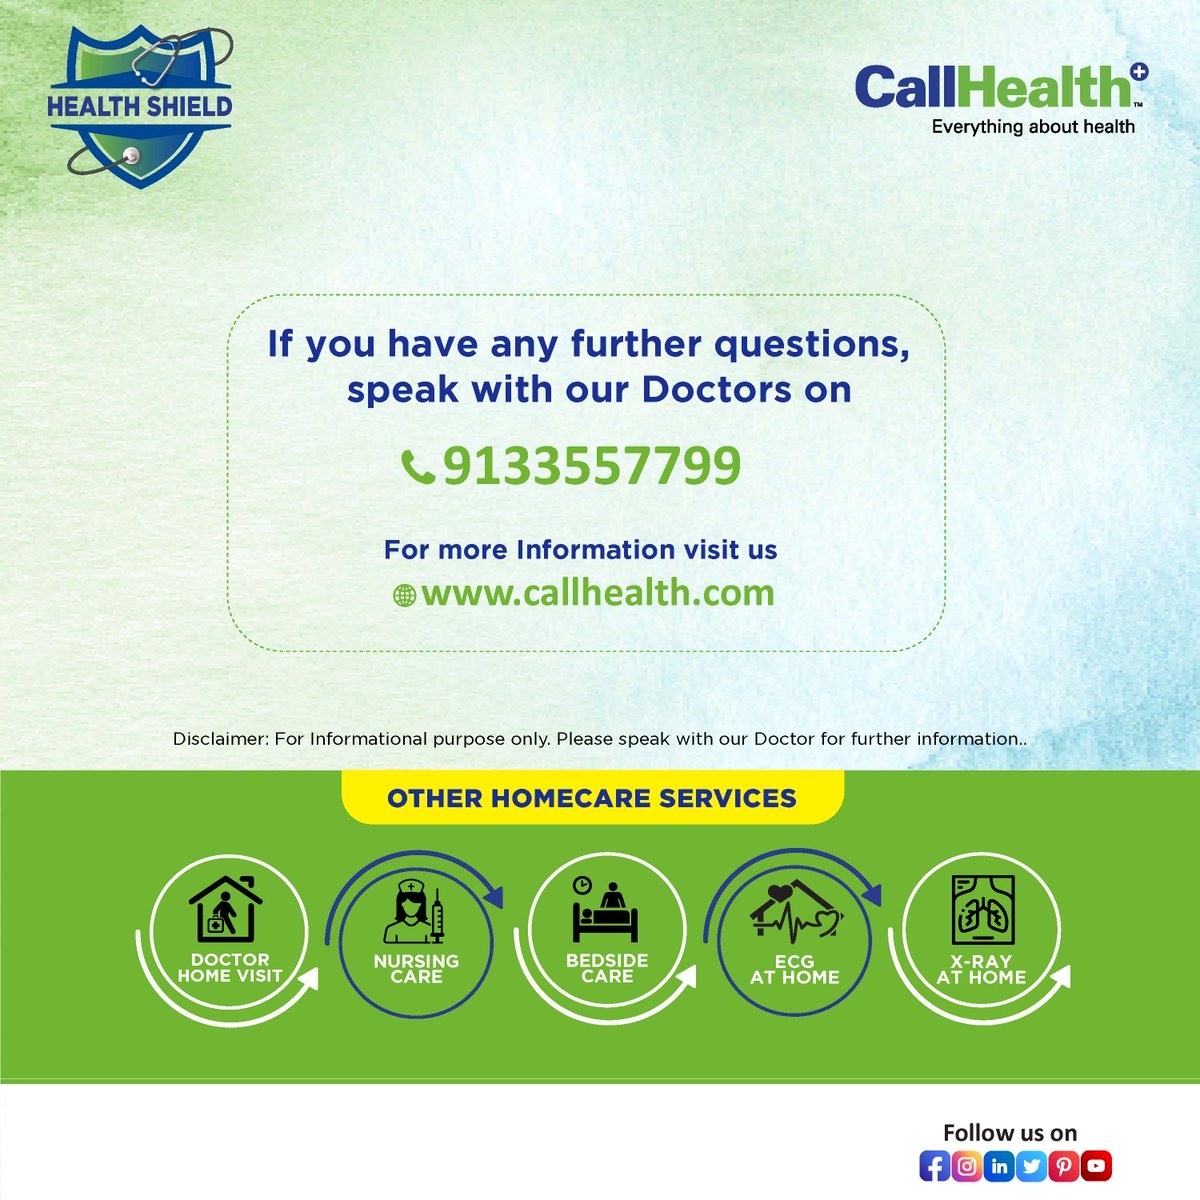 CallHealth
INTRODUCING
CURATED SET OF HEALTHCARE PACKAGES FOR EVERYONE
#CallHealth-#EverythingAboutHealth
#health #healthylife #healthcheck #healthcheckup #healthcare #medicine #medical #offers #discount #doctor #bodycheckup #diagnosticsonline #Malehealth #Femalehealth